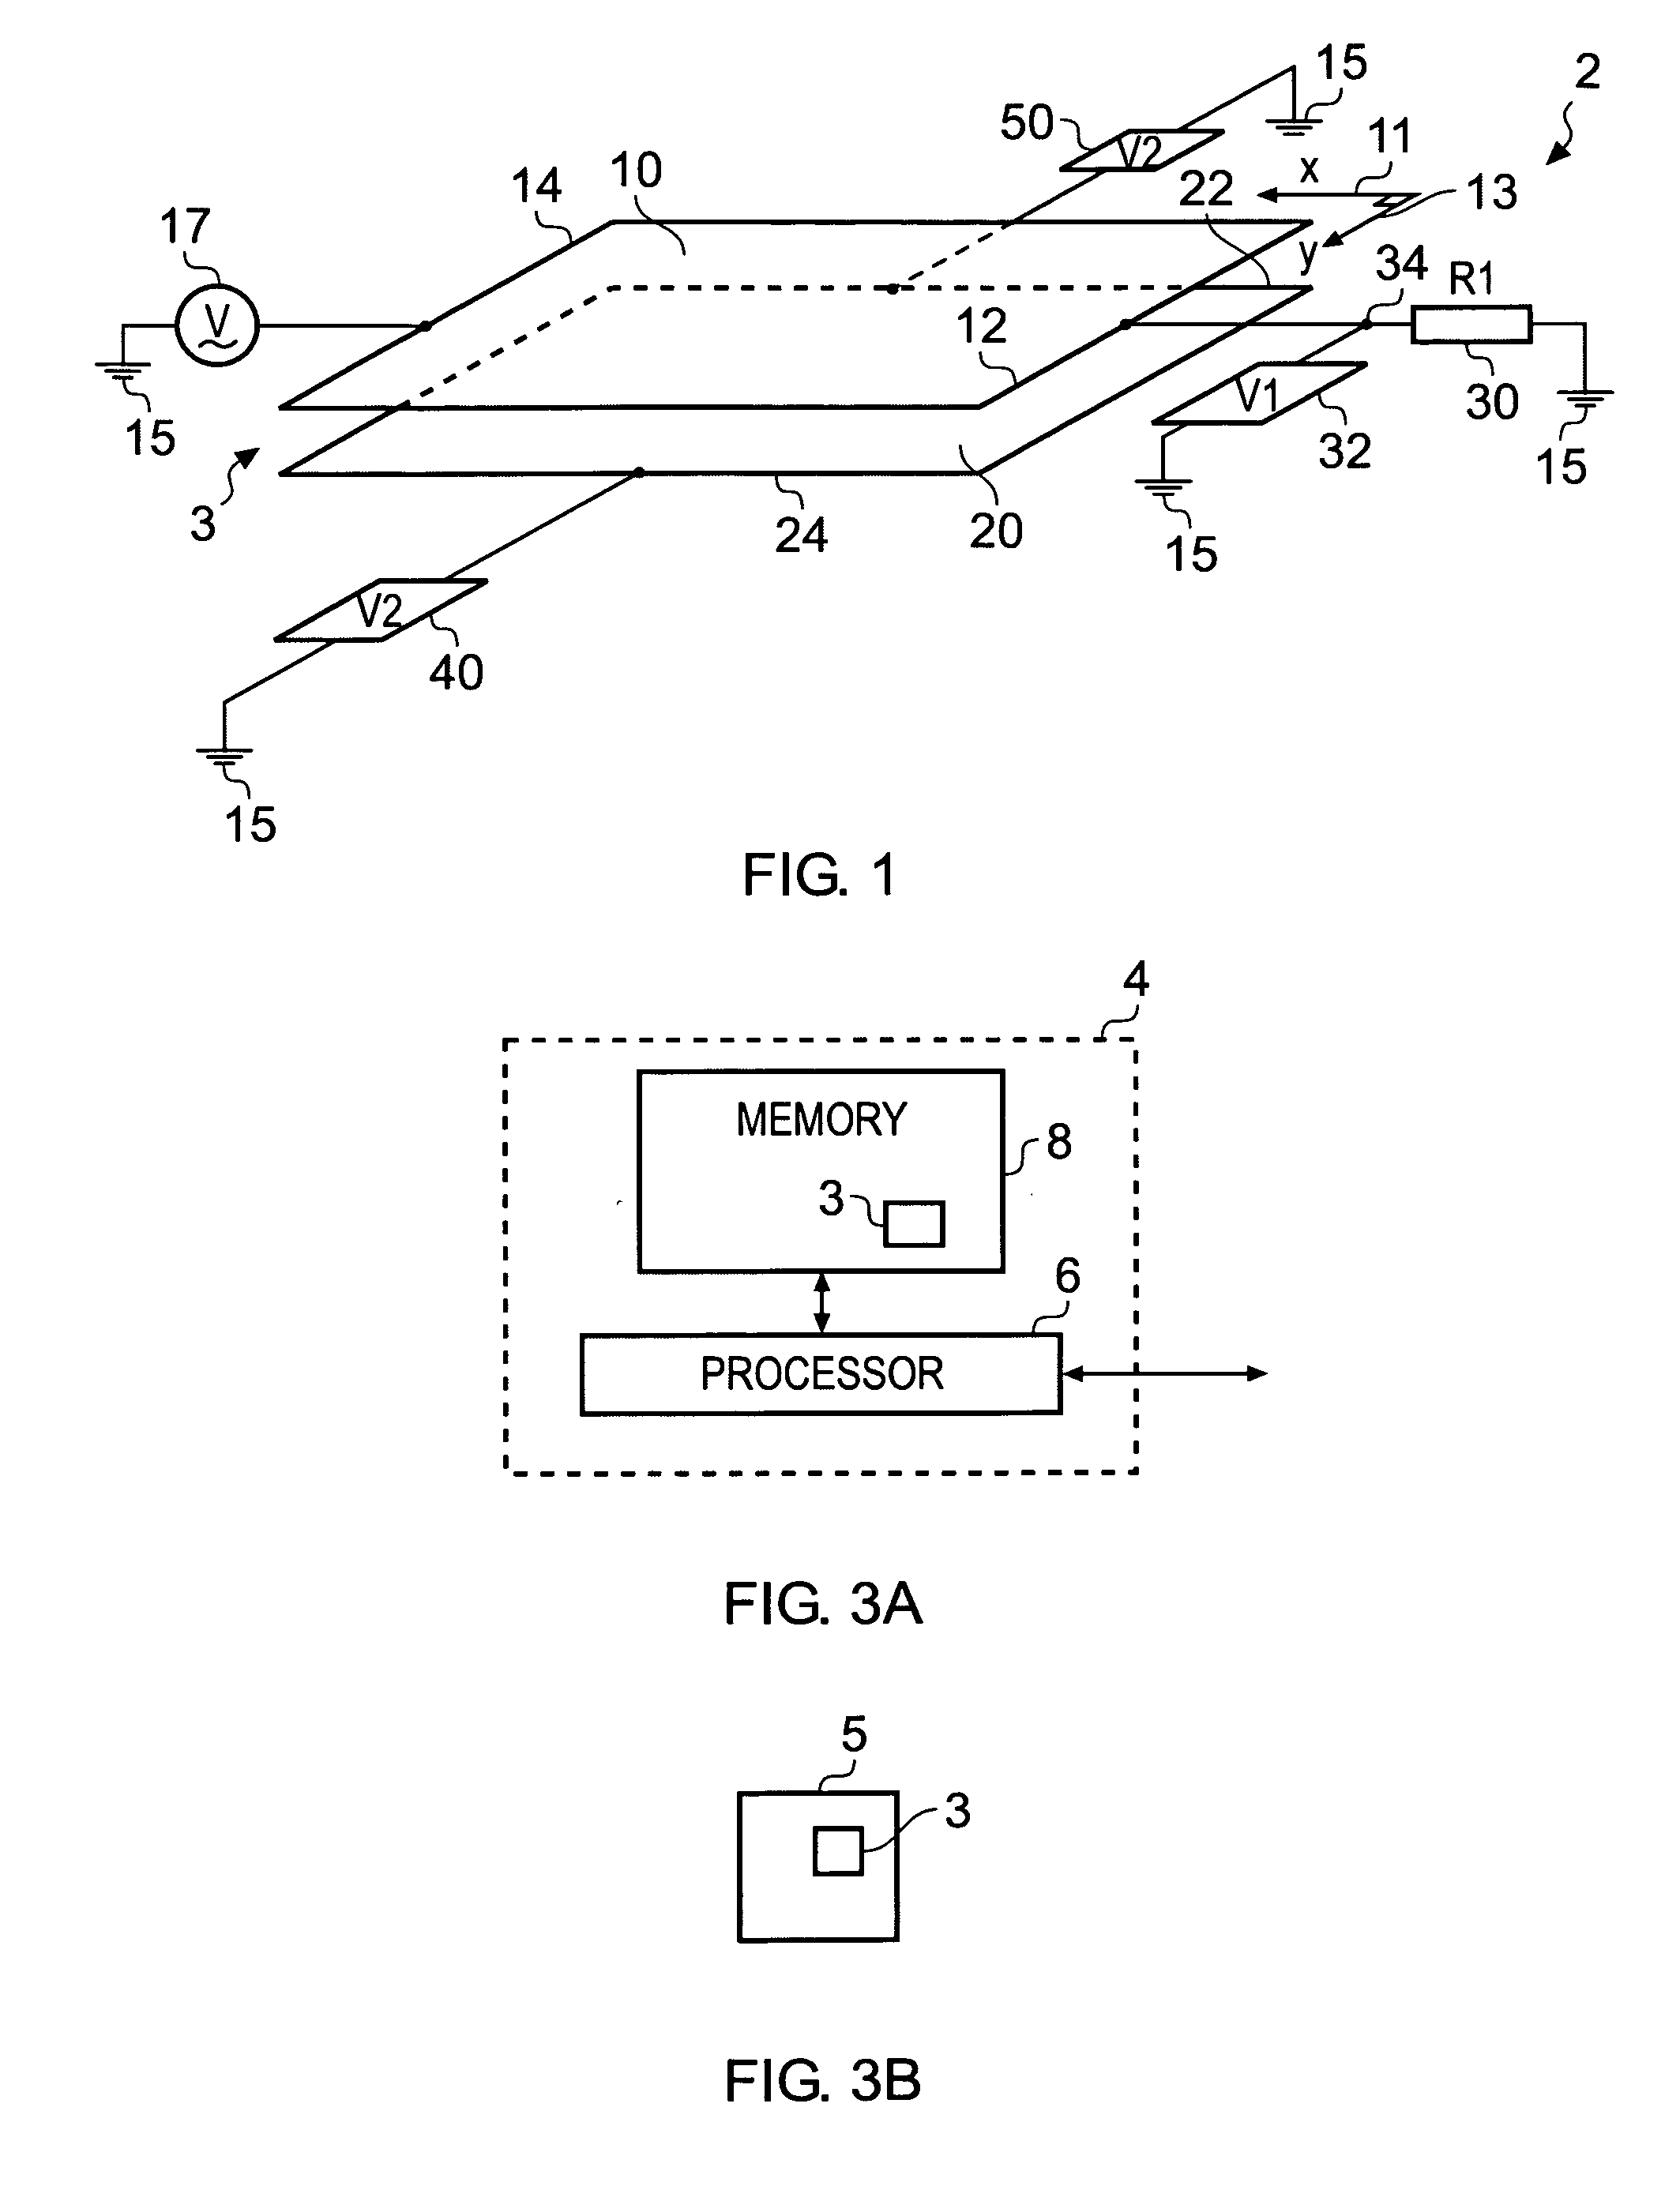 Resistive touch screen apparatus, a method and a computer program